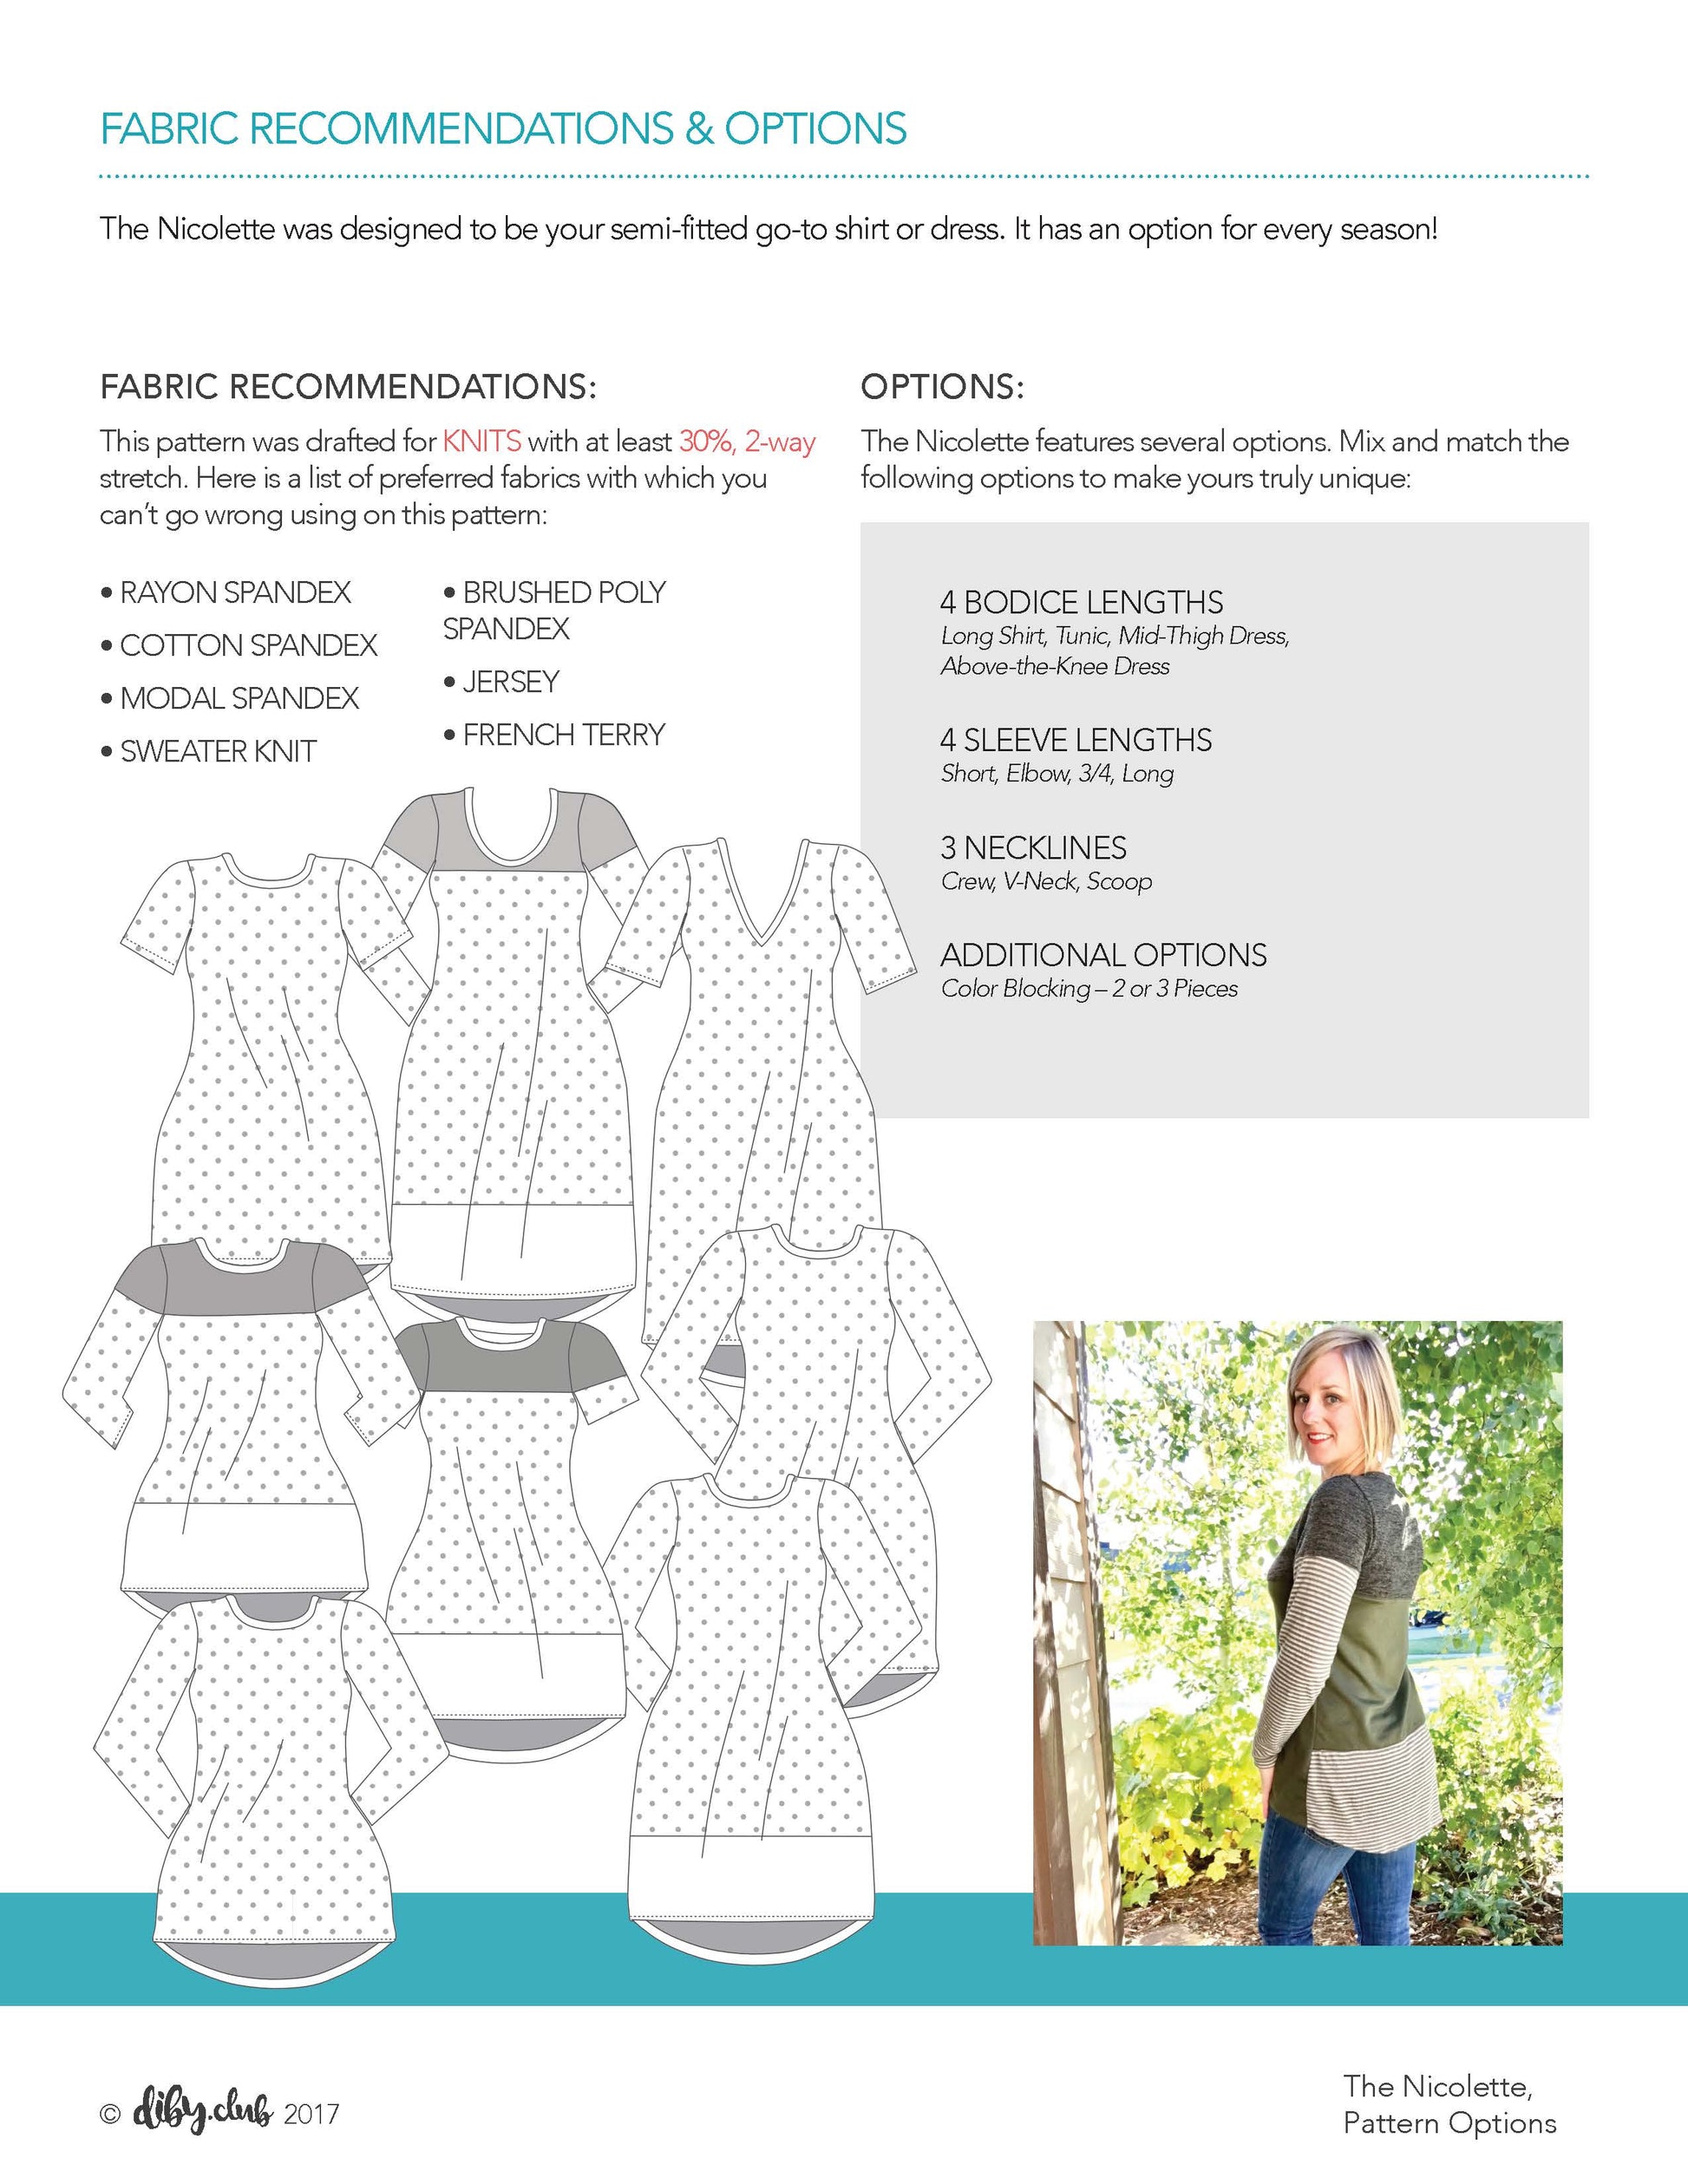 The Nicolette Pattern Options and Fabric Recommendations. 